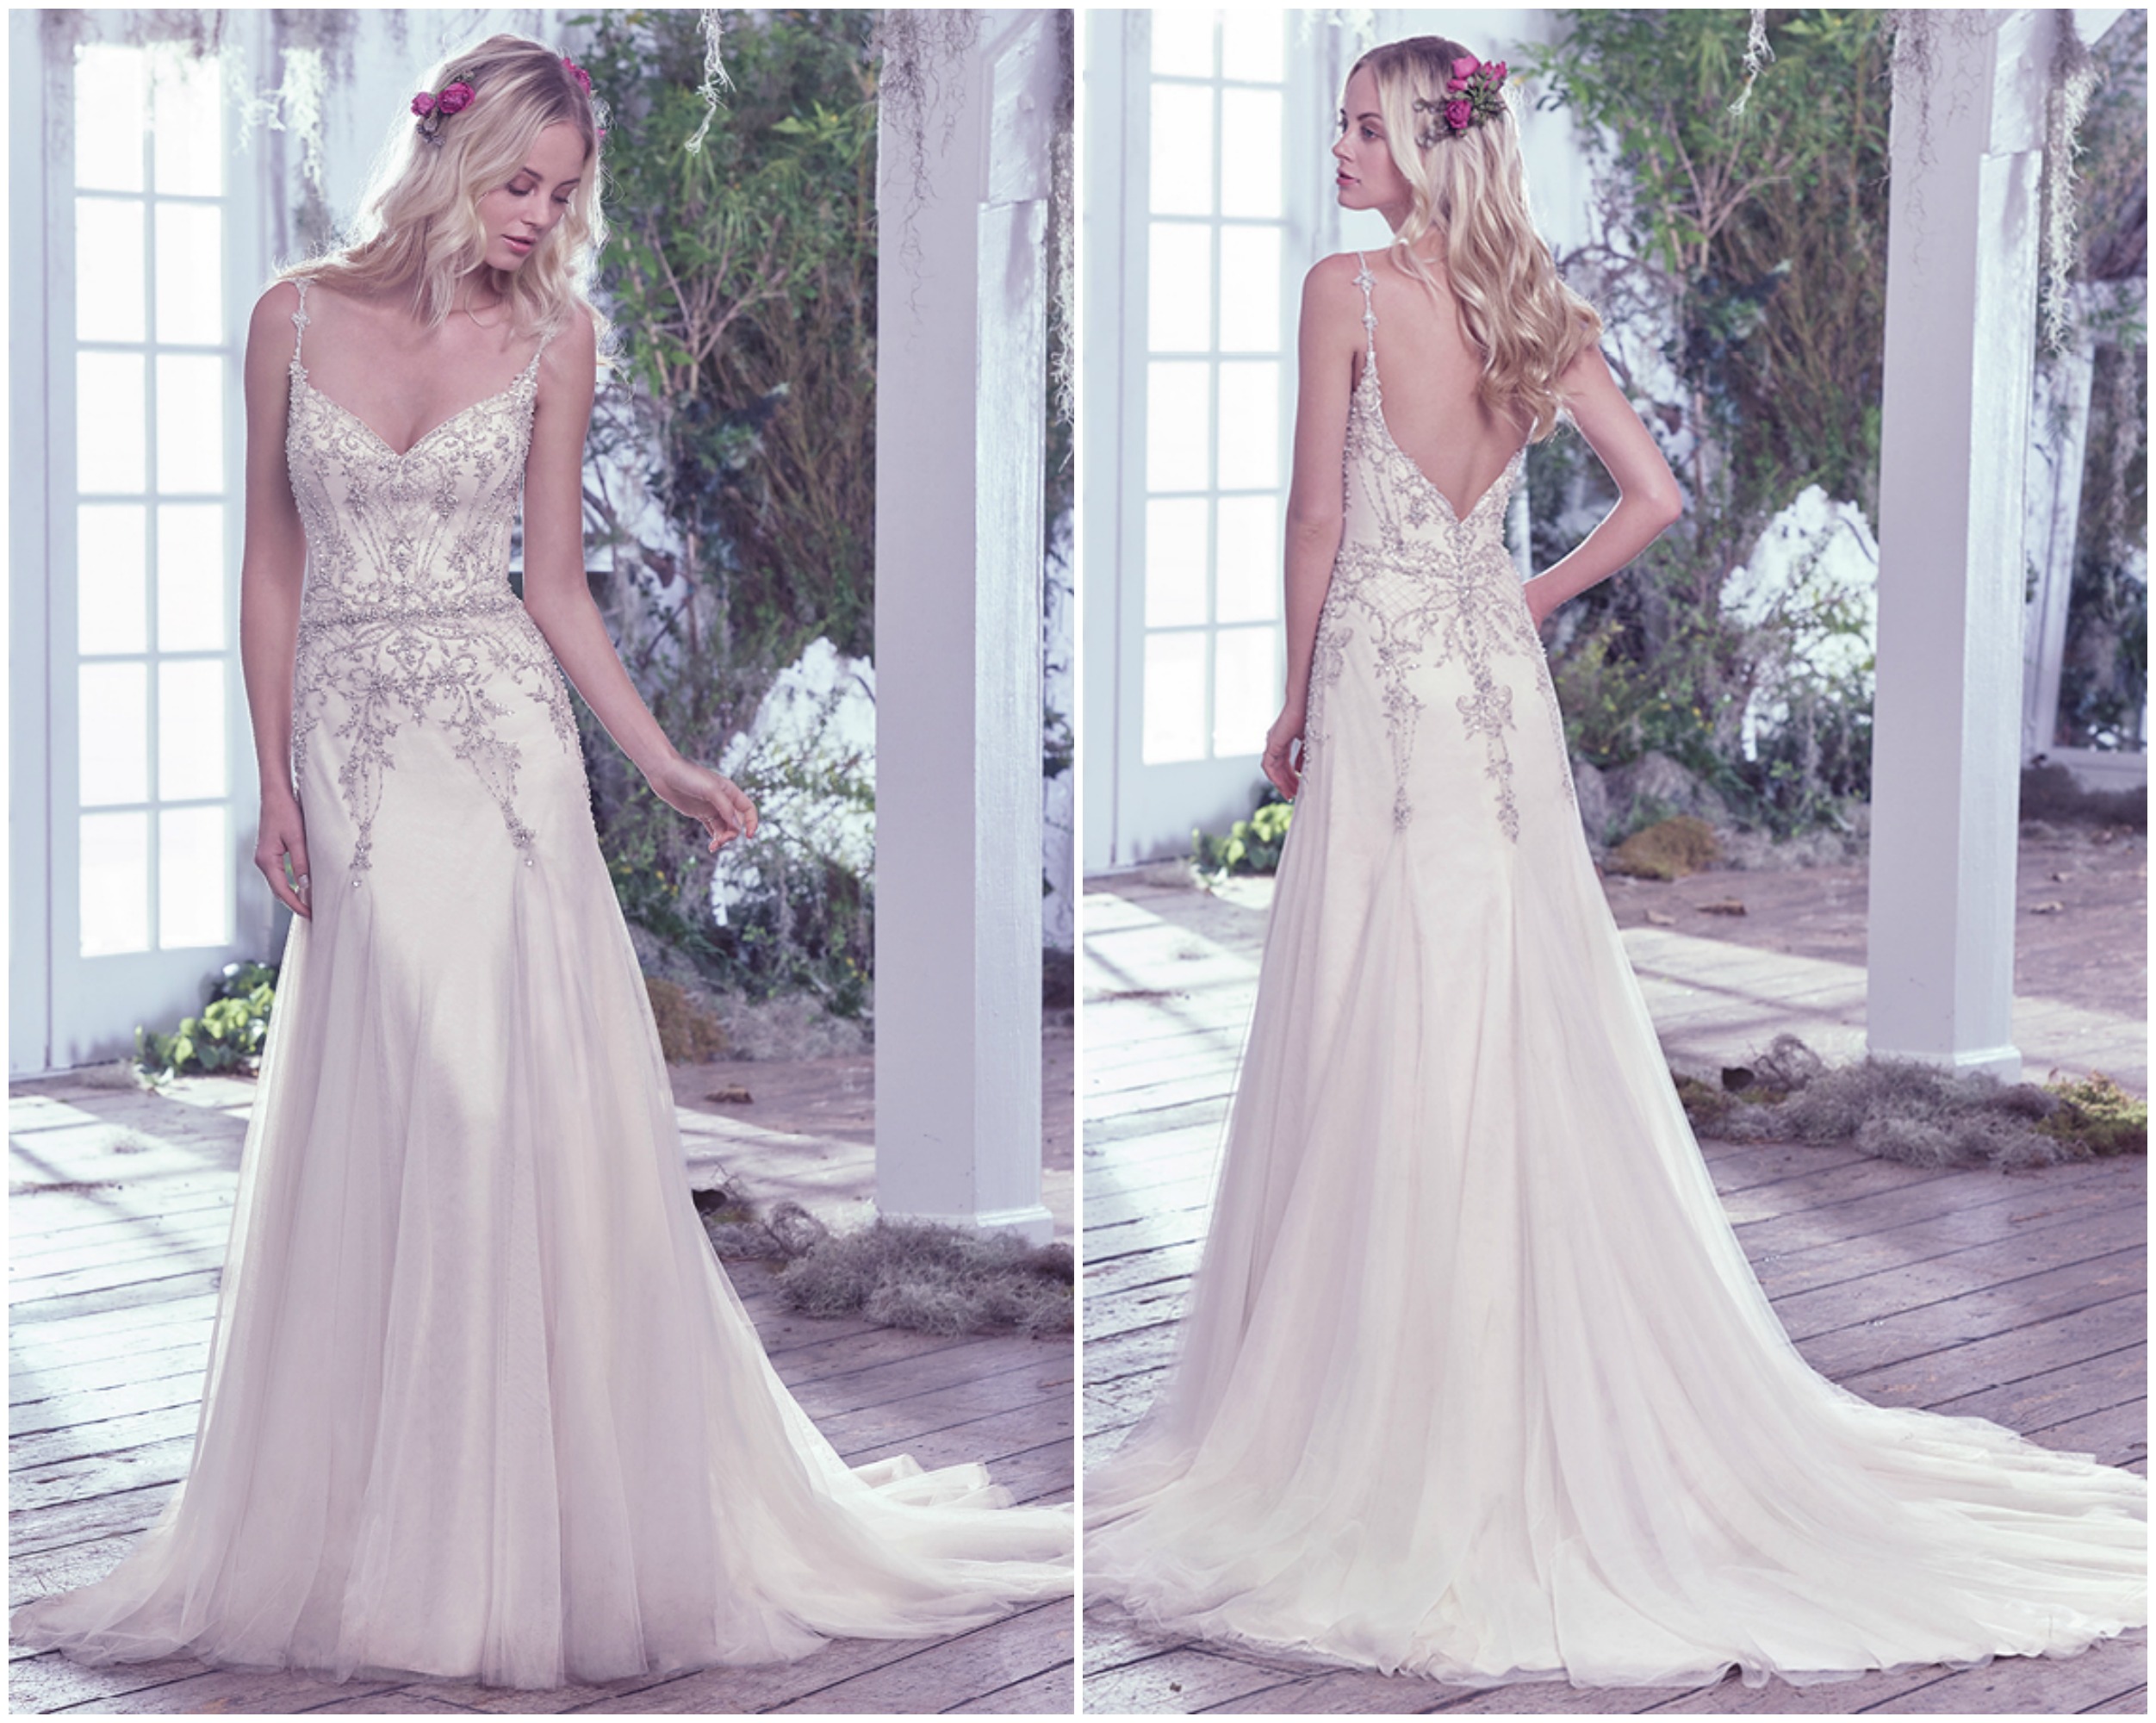 Modern and romantic, this seemingly weightless slim A-line wedding dress is adorned with Swarovski crystals and glimmering beaded embellishments on soft tulle. Godet panels add soft volume and ethereal elegance to the skirt. Finished with sweetheart neckline and crystal buttons over zipper closure. 

<a href="https://www.maggiesottero.com/maggie-sottero/andraea/9720" target="_blank">Maggie Sottero</a>